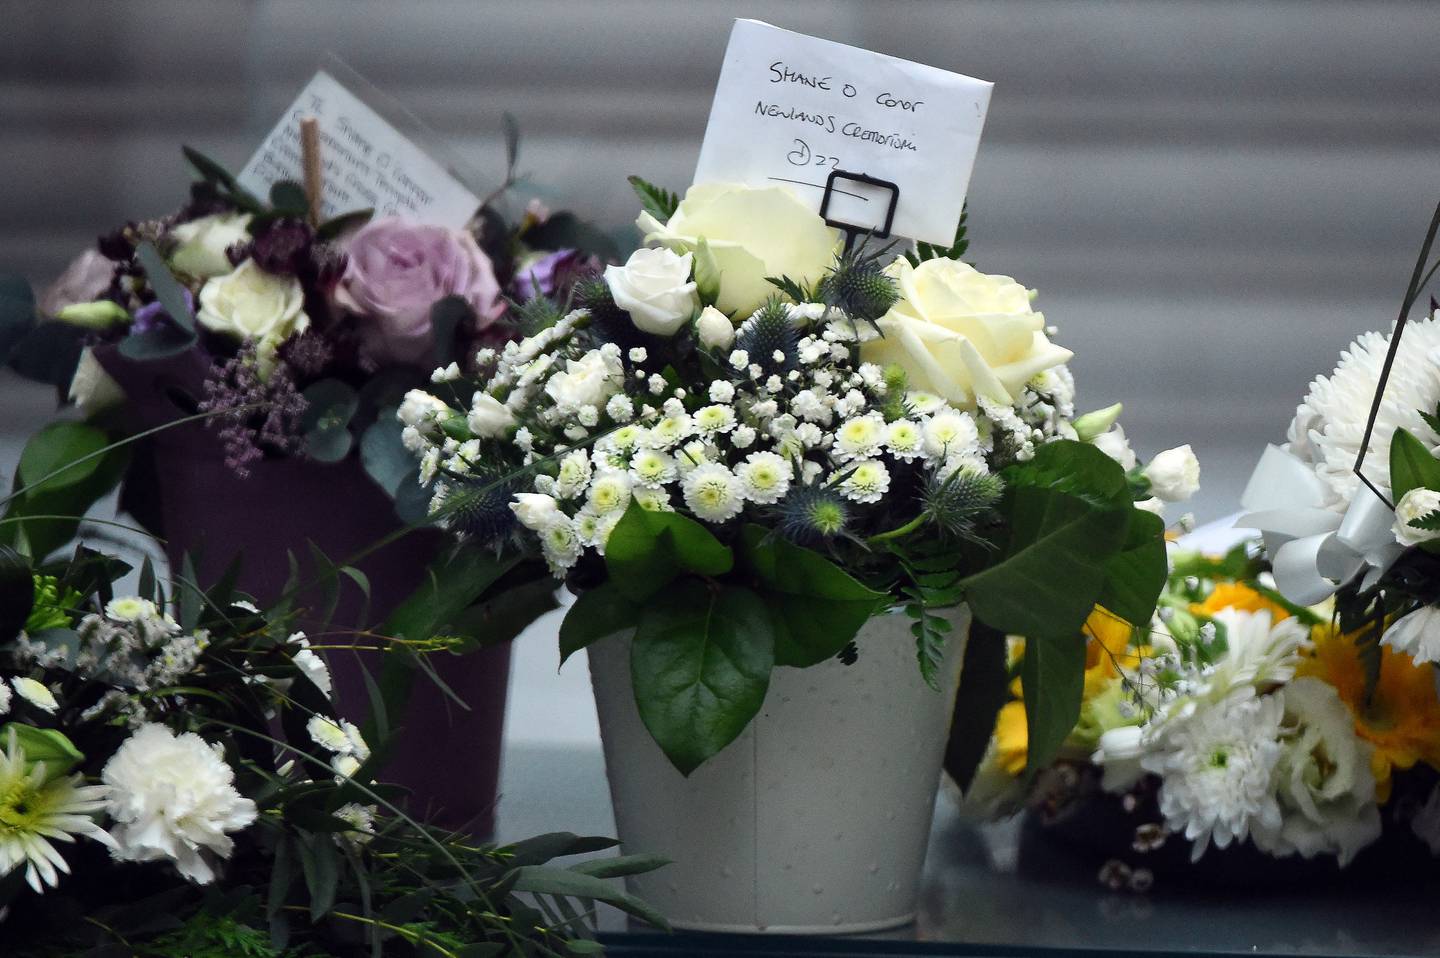 Flowers at Newlands Cross crematorium in Dublin, Ireland, for Shane O'Connor, the late son of singer Sinead O'Connor. Reuters